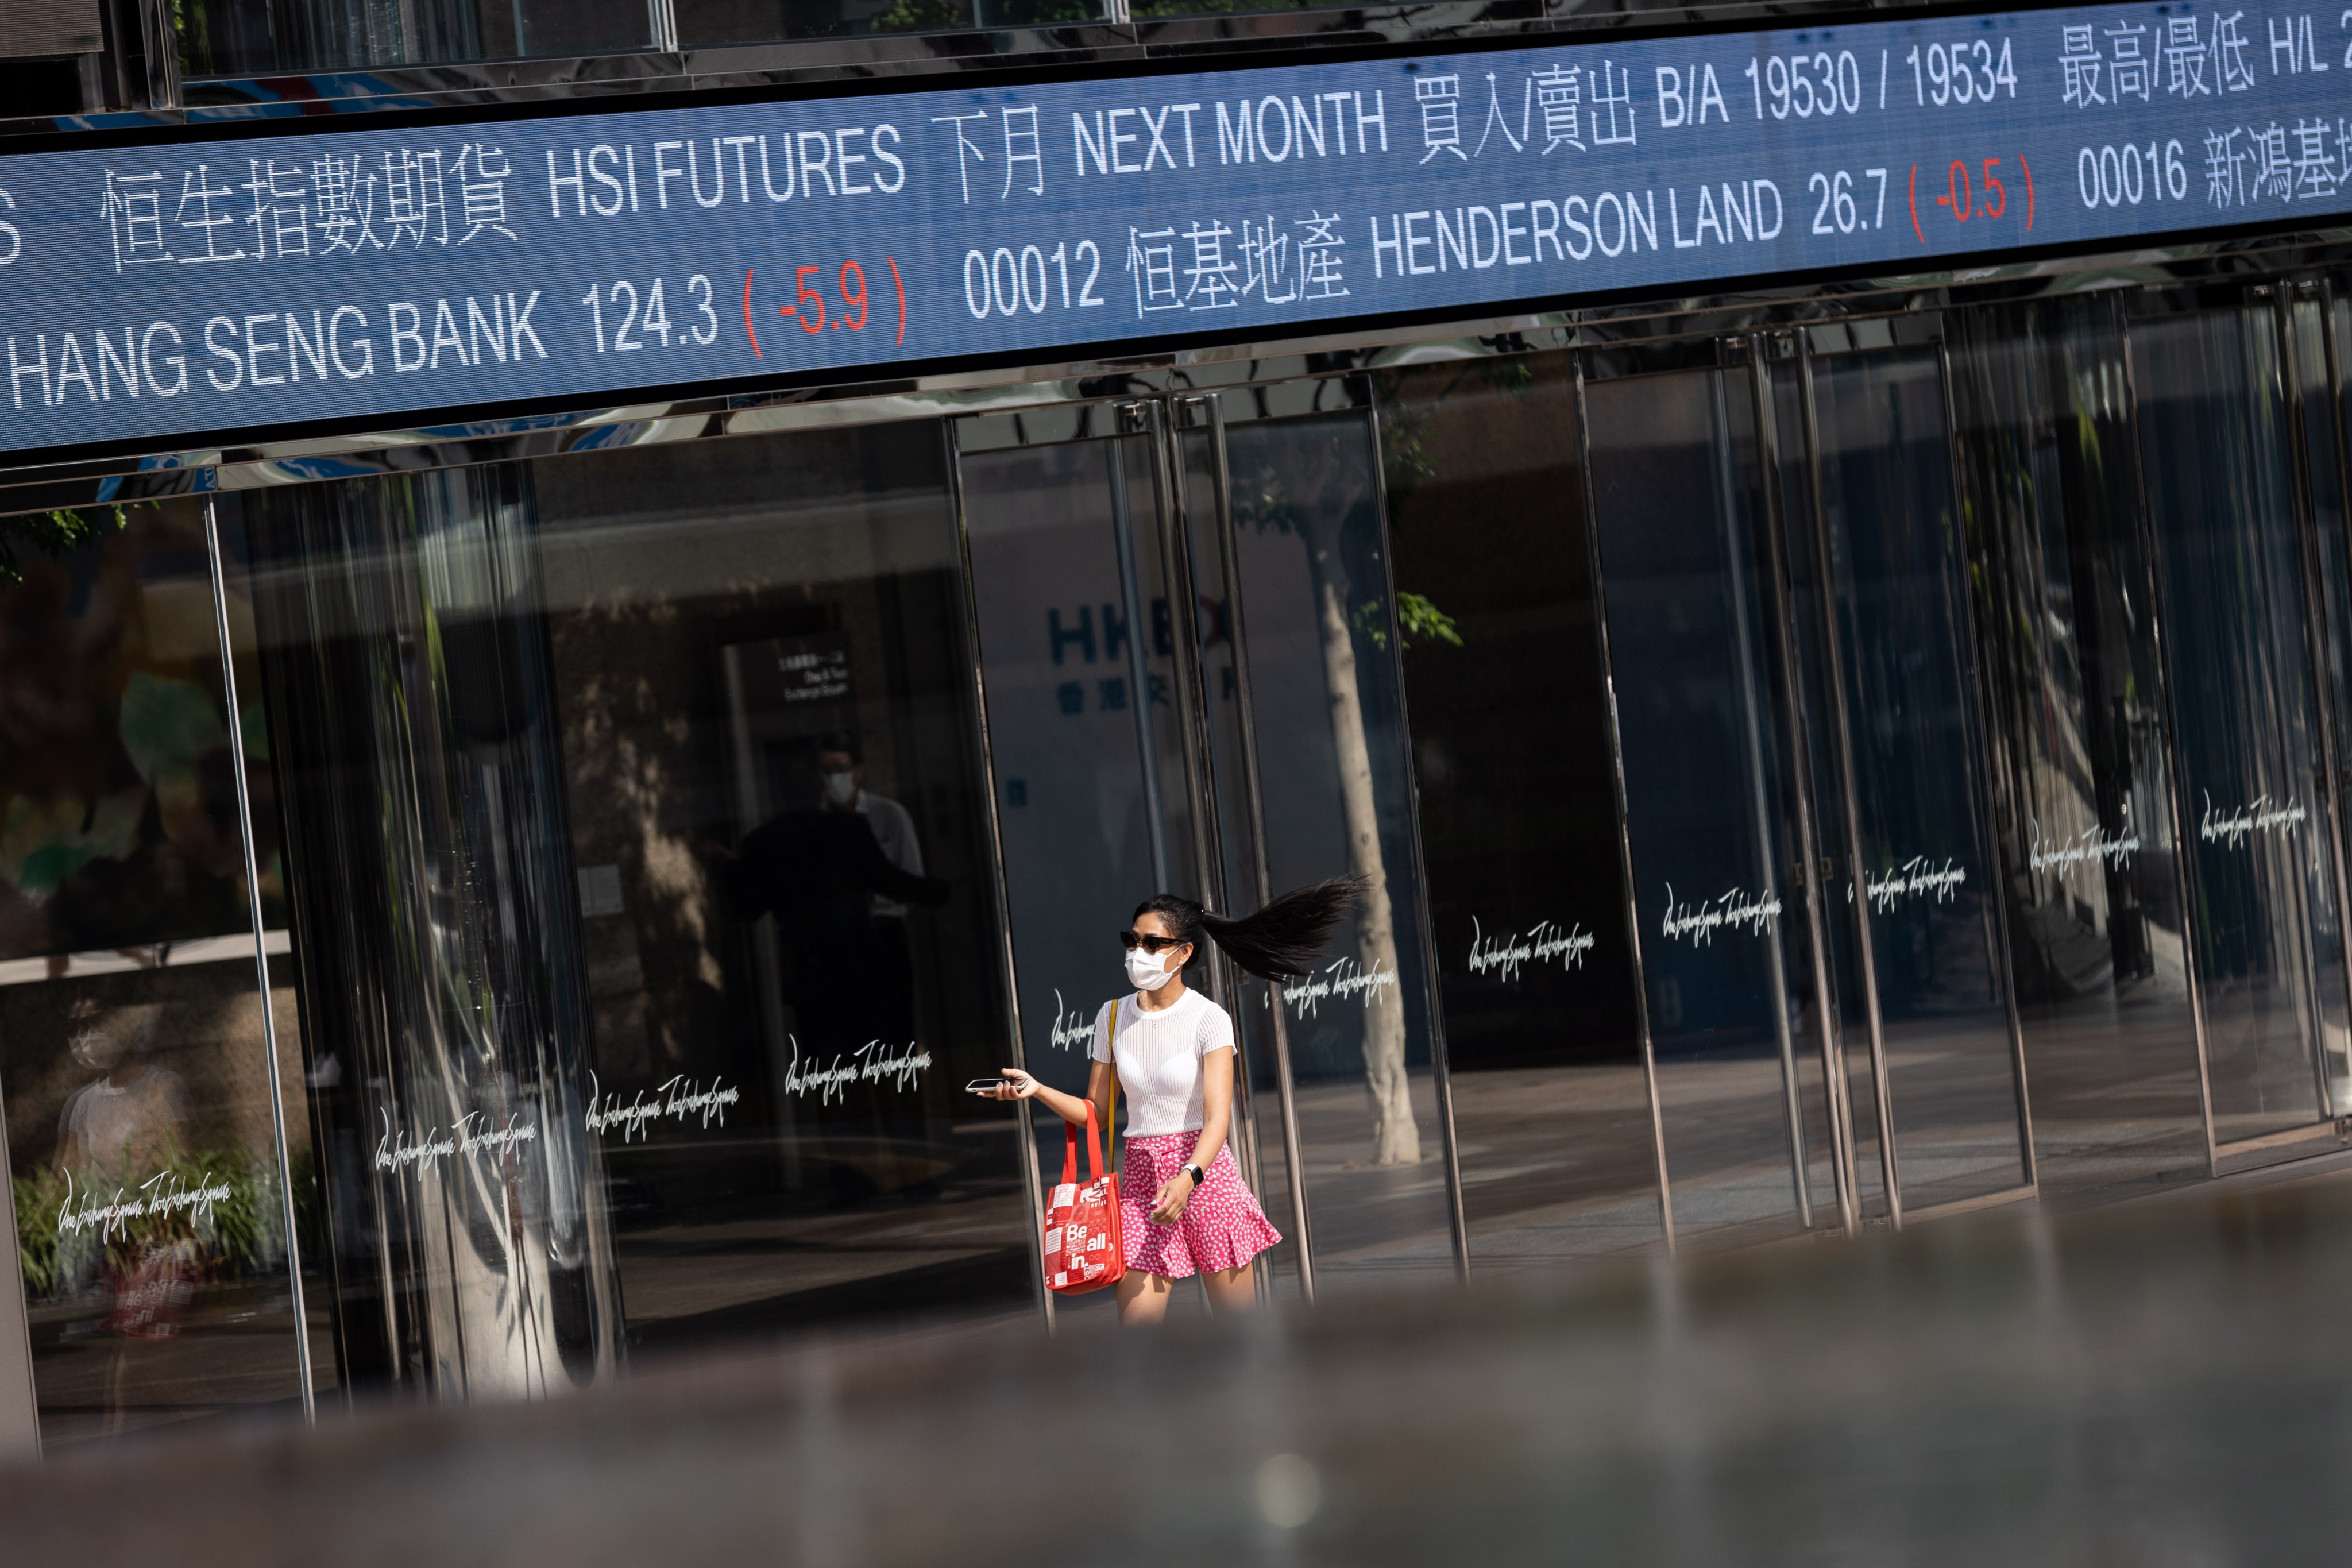 A woman walks past the Exchange Square in Central, Hong Kong with tickers showing stock prices. Photo: EPA-EFE